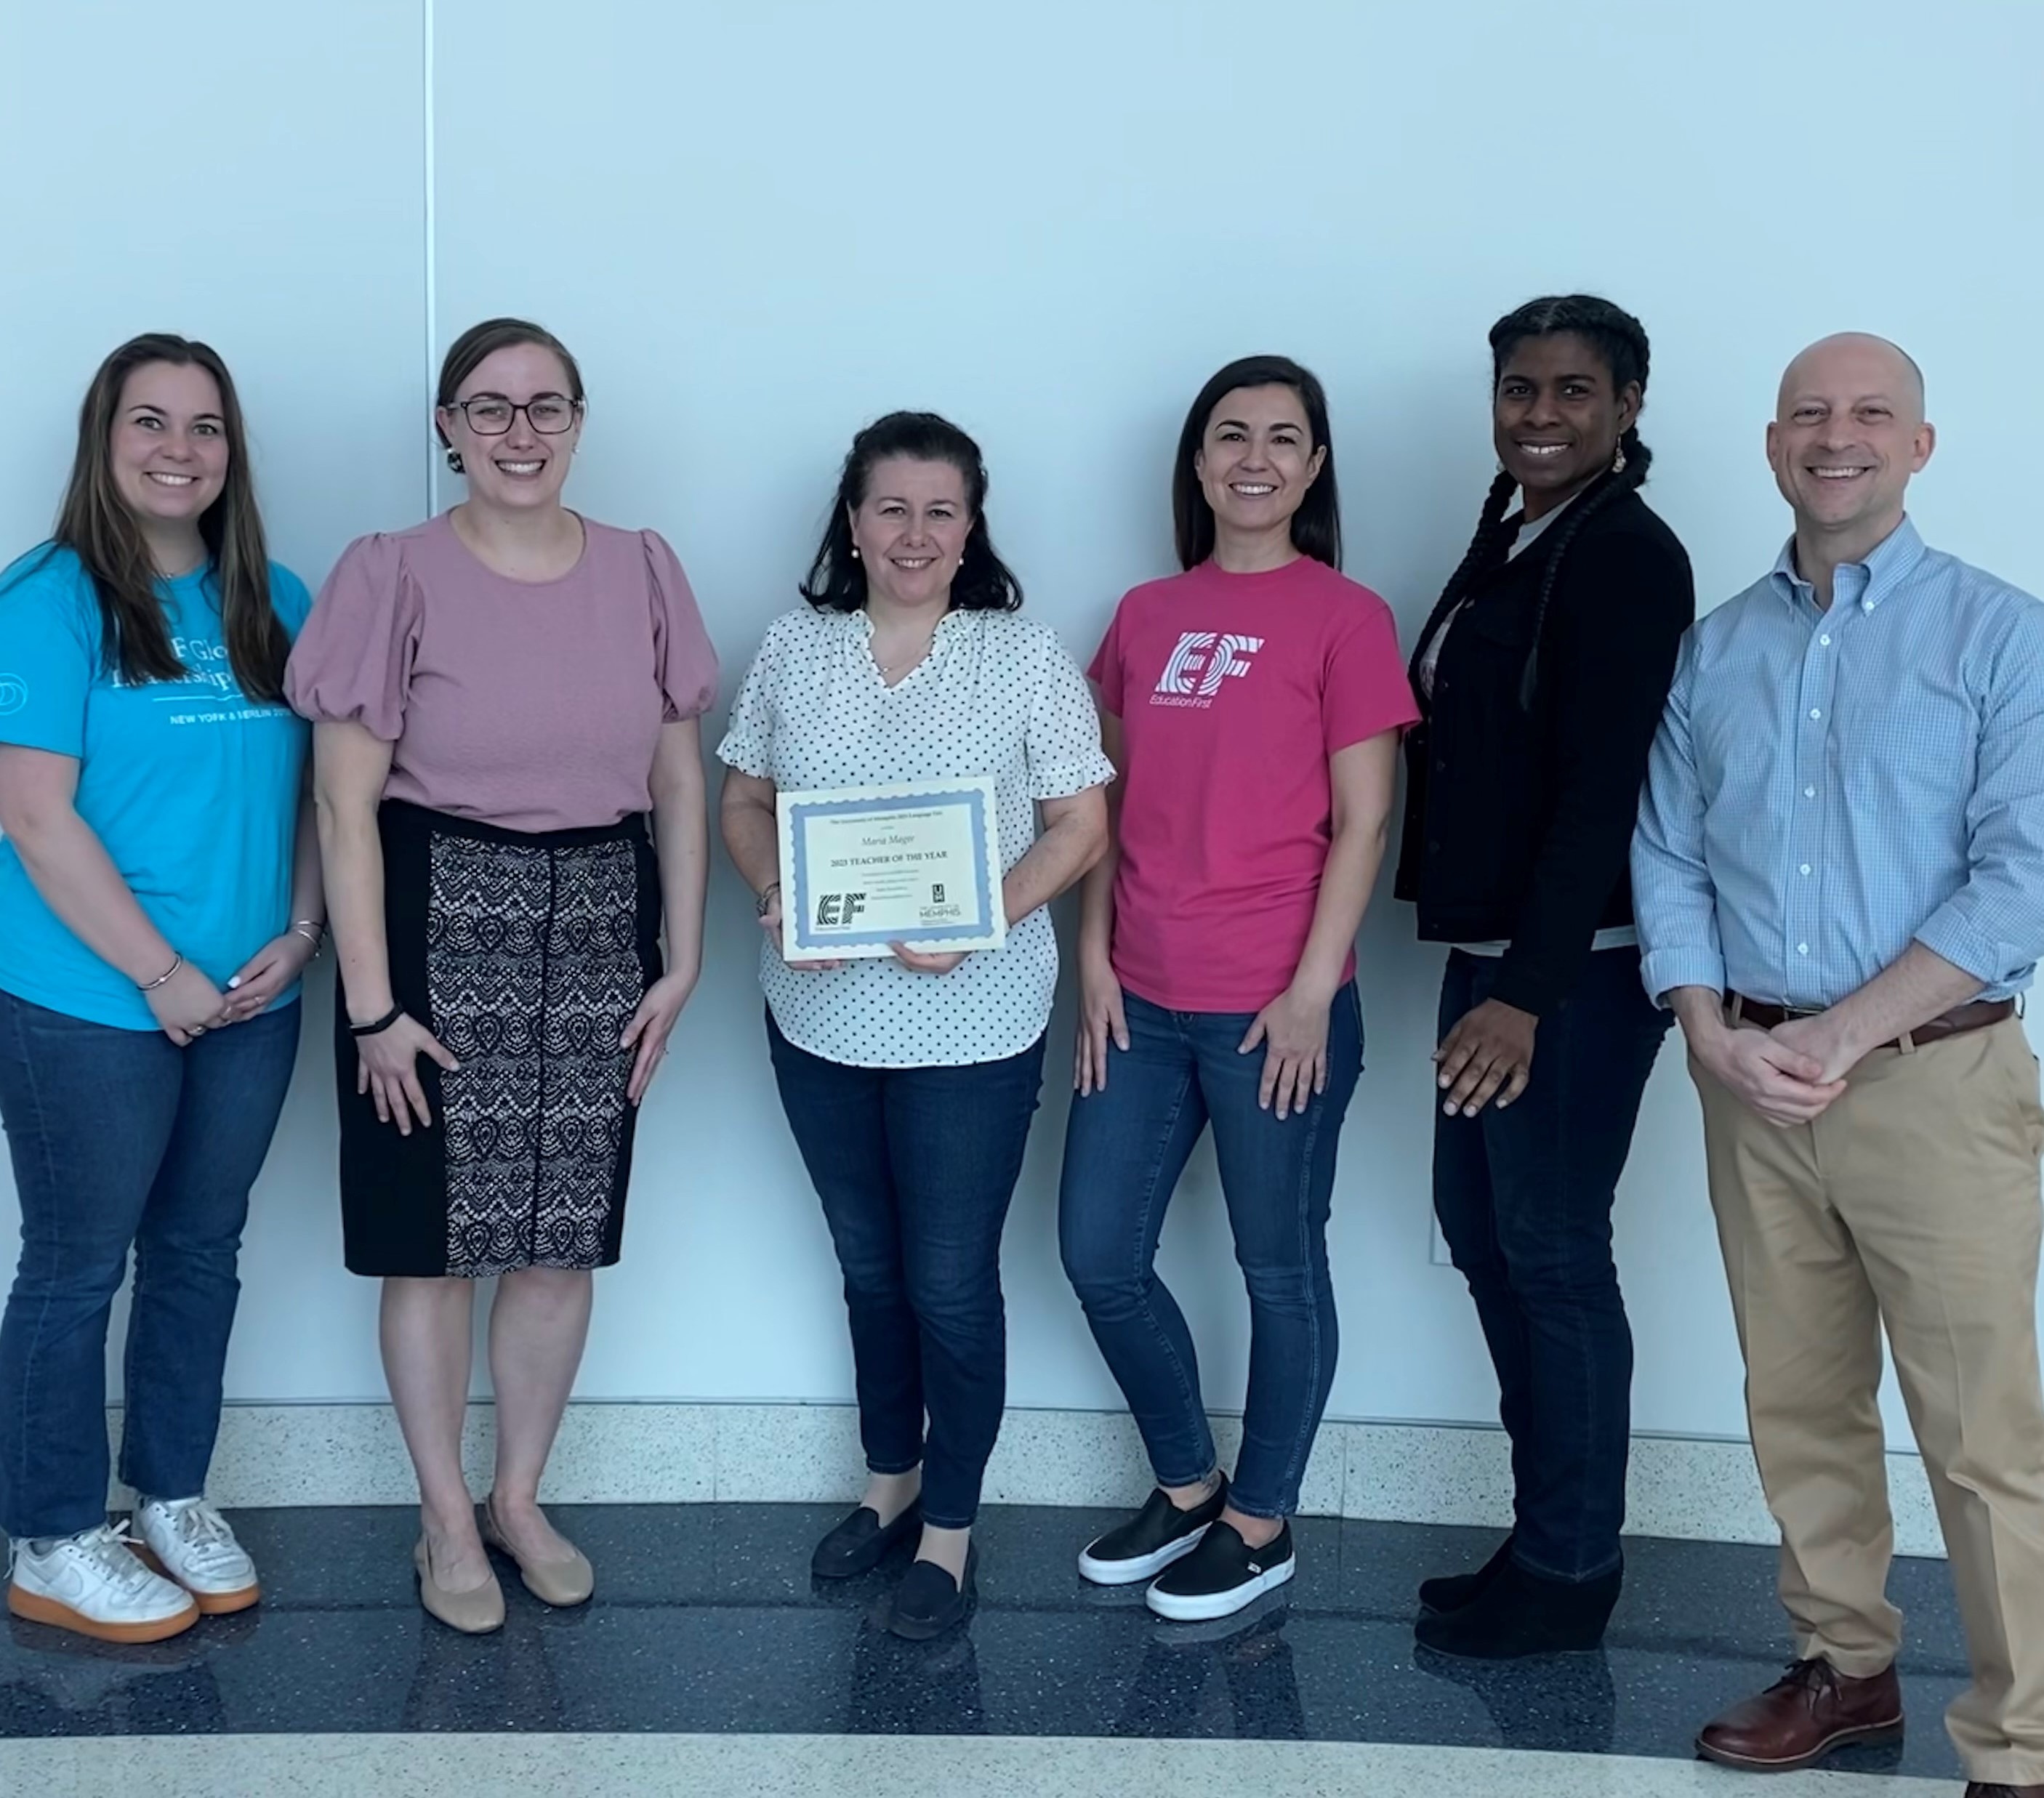 Pictured (left to right): Jackie Robert (EF Tours), Jessica Charlton (Medical District High School), Maria Magee (White Station High School), Malia Rummell (EF Tours), Nacole Espada (East High School), Robert Kelz (Chair, University of Memphis Department of World Languages and Literatures).